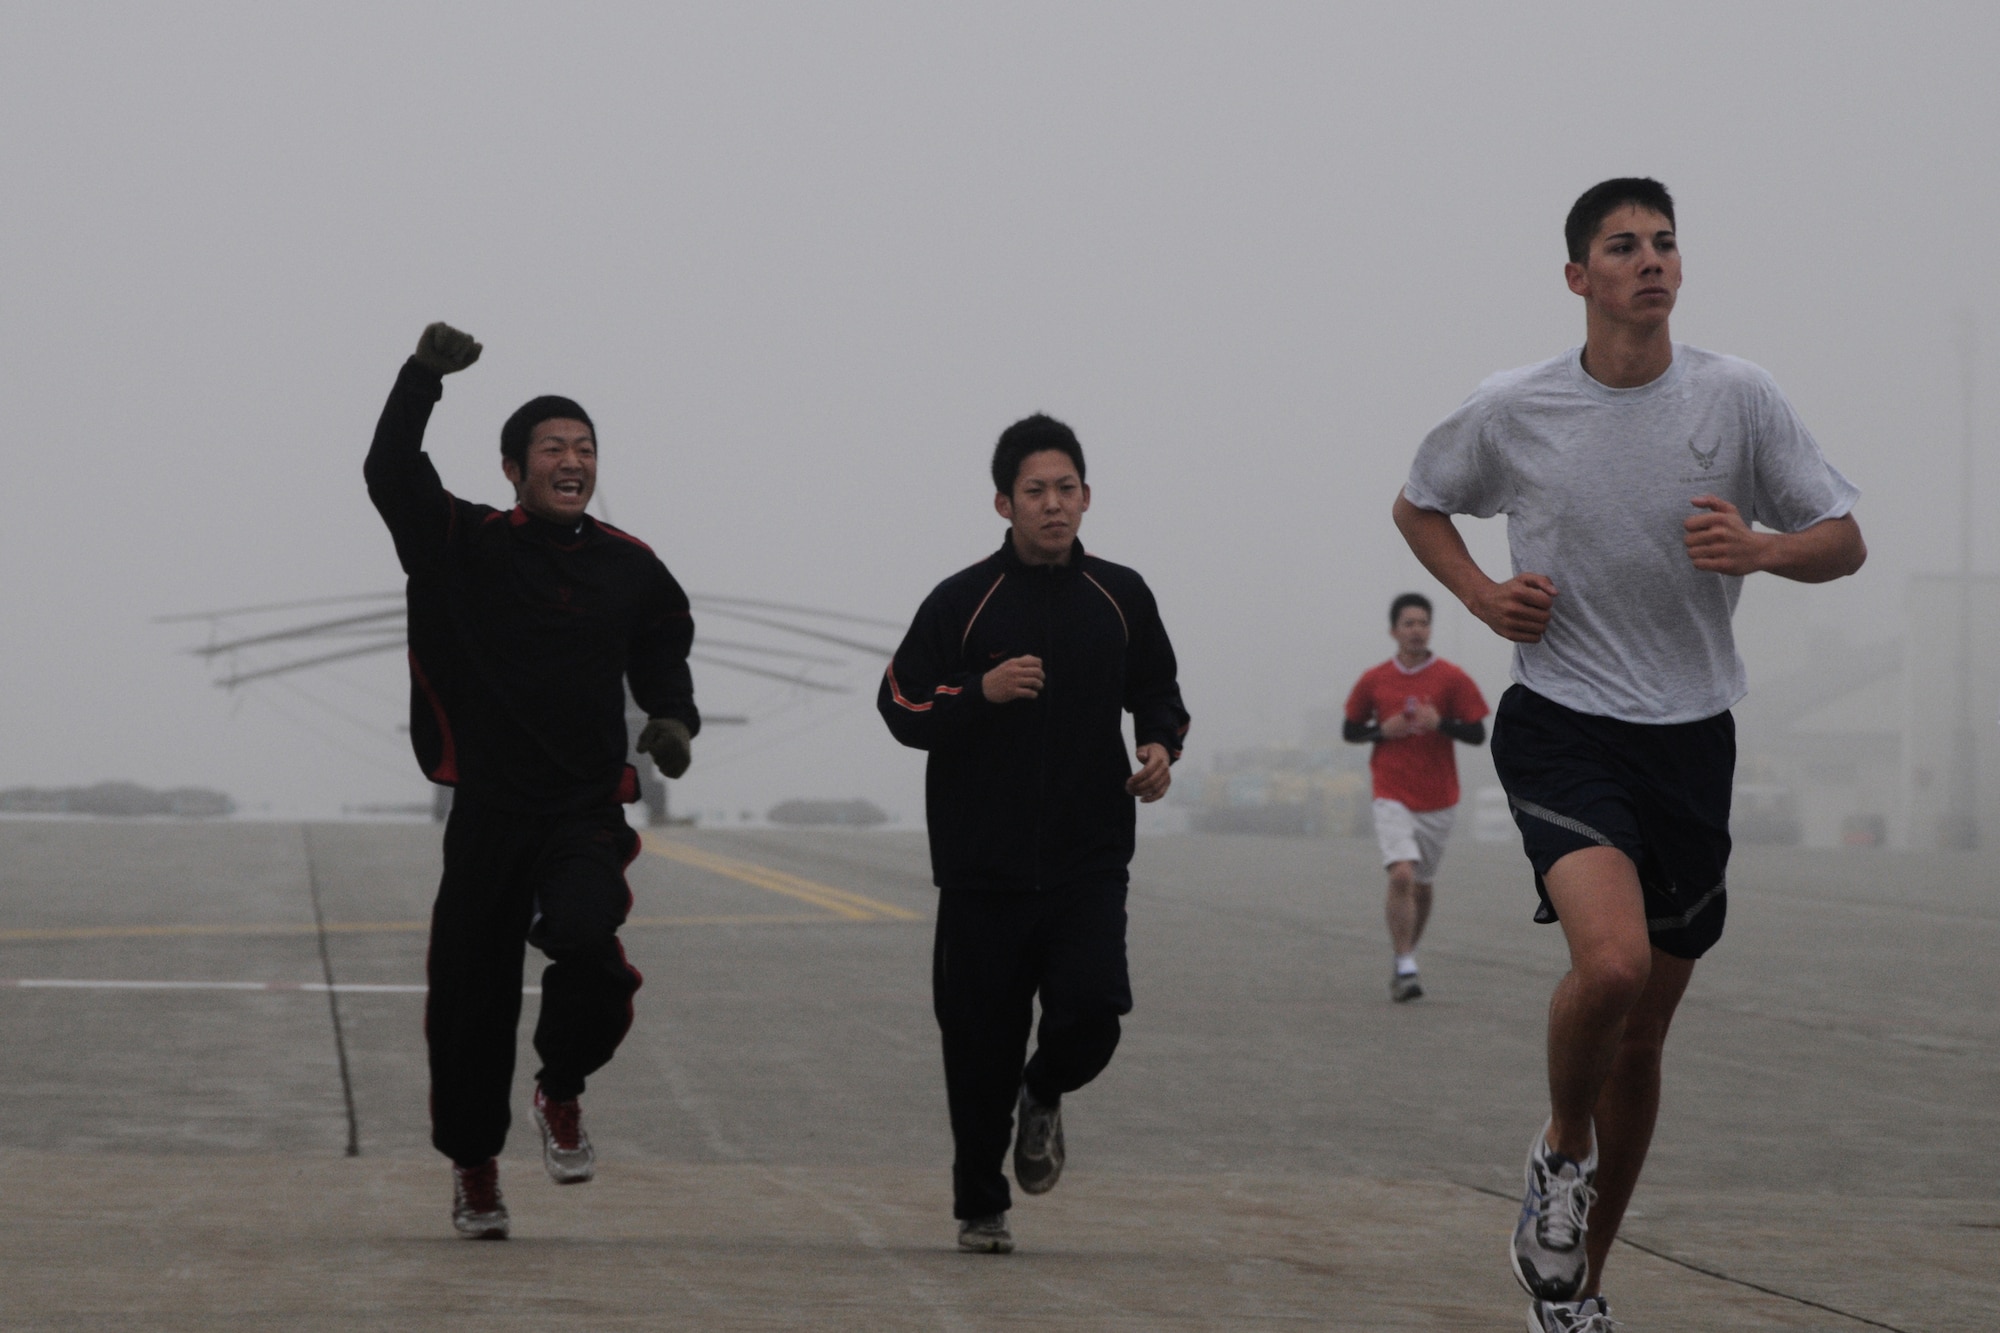 MISAWA AIR BASE, Japan -- A member of the Japan Air Self-Defense Force shows his enthusiasm during a readiness run with fellow JASDF members, Airmen, Soldiers and Sailors May 8, 2009. Readiness runs are held six months of the year to build unit morale and encourage fitness. (U.S. Air Force photo by Senior Airman Jamal Sutter)